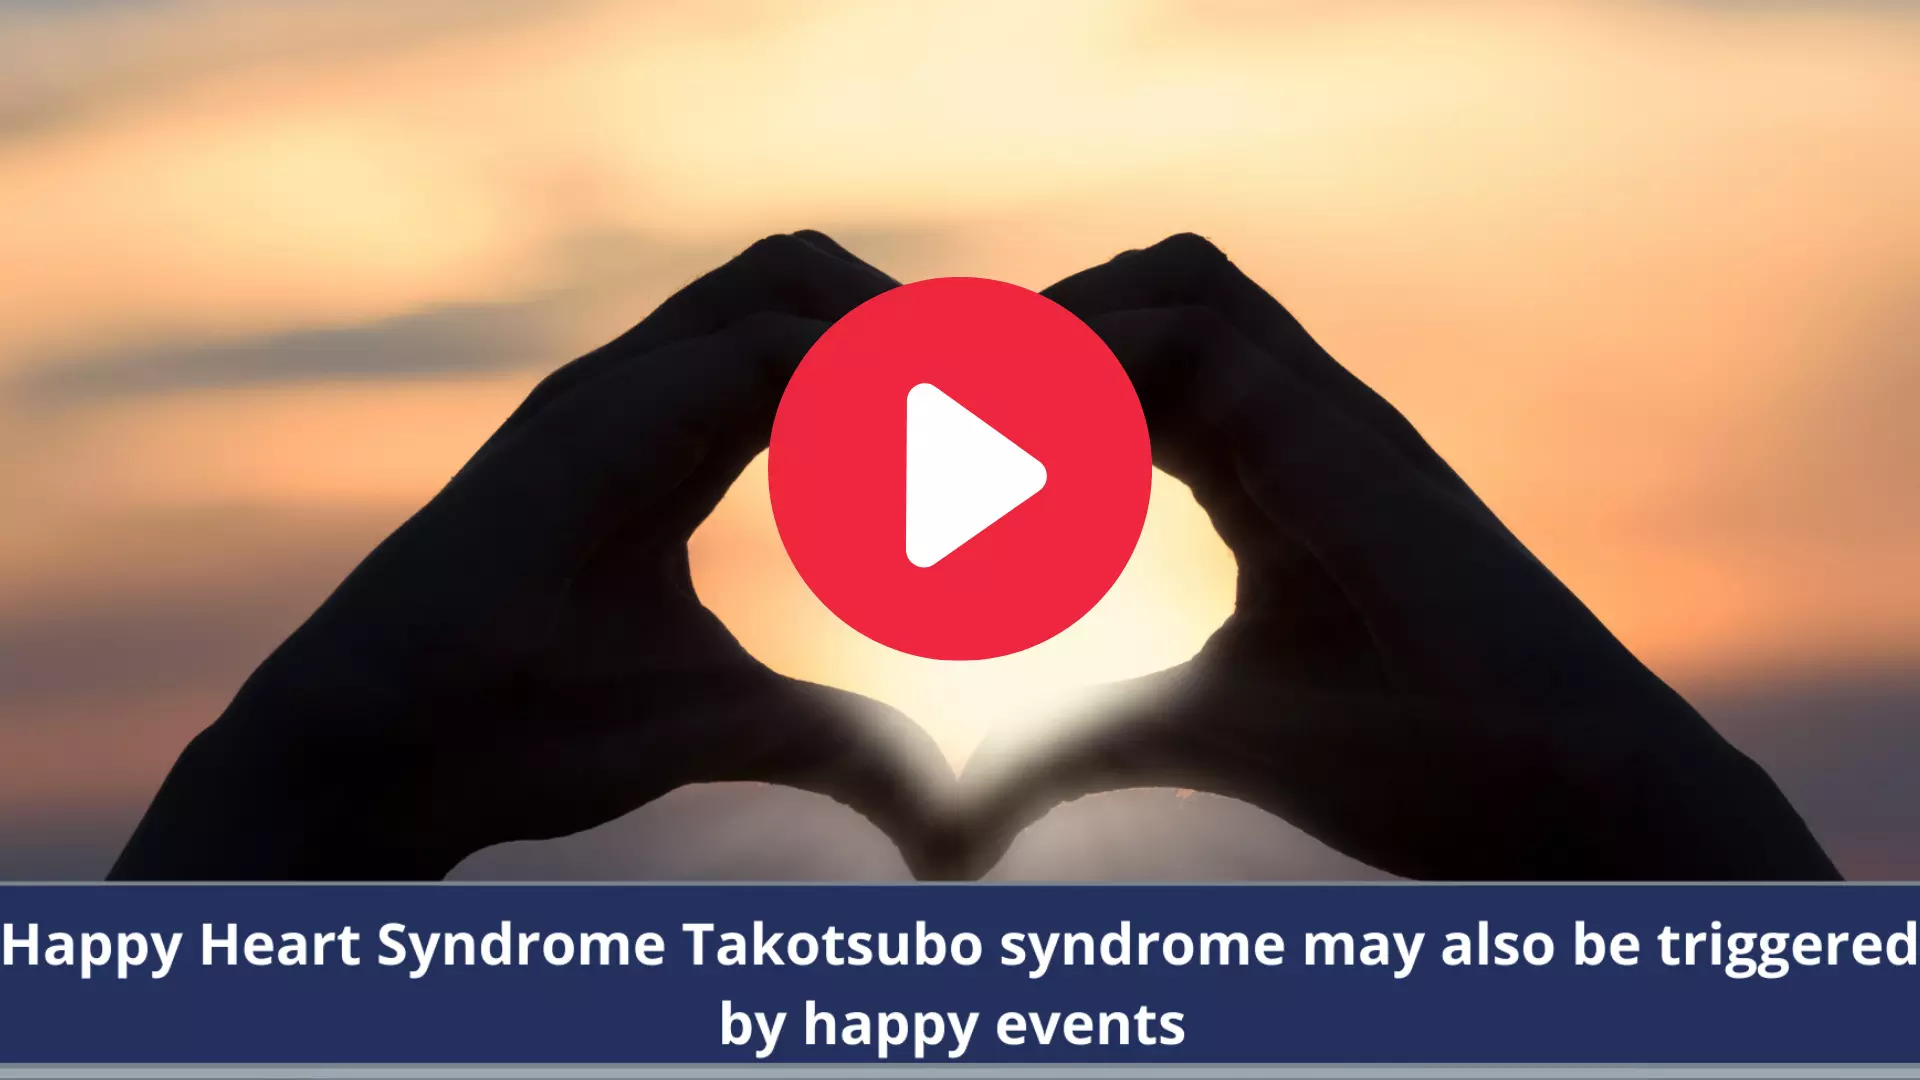 Happy Heart Syndrome Takotsubo syndrome may also be triggered by happy events